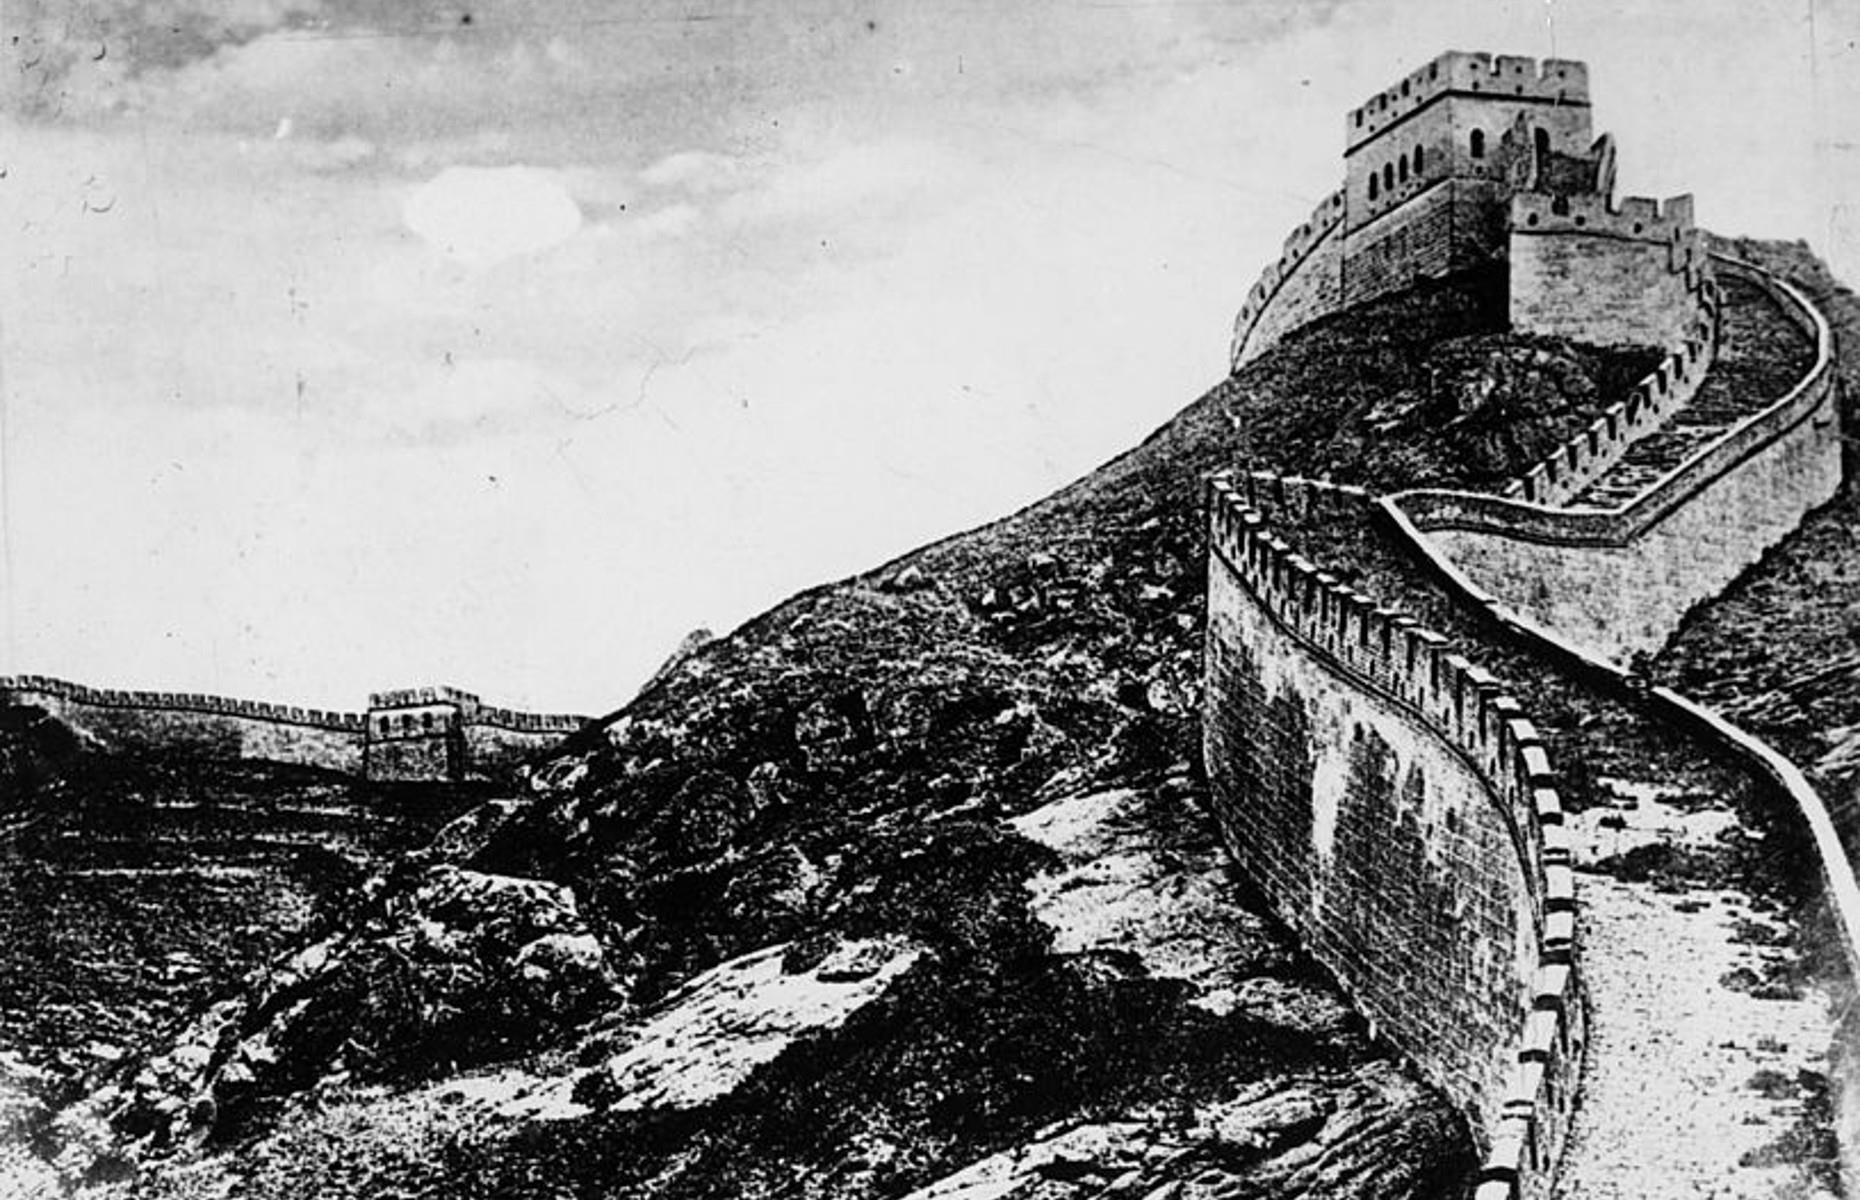 <p>The popular myth that the Great Wall of China is visible from space only emphasizes how mighty the structure actually is. But still it strains under the weight of tourists. In 2018, more than 9.9 million people visited the ancient wall – that's 80,000 per day in the peak season. It became so congested that <a href="https://travelweekly.co.uk/articles/333442/china-restricts-visitor-numbers-at-great-wall">caps had to be put on visitor numbers</a>. However, go back to the 19th century and it was a different story. The wall had fallen into disrepair, and it was only in 1911 that it was seen as a national monument worthy of preservation.</p>